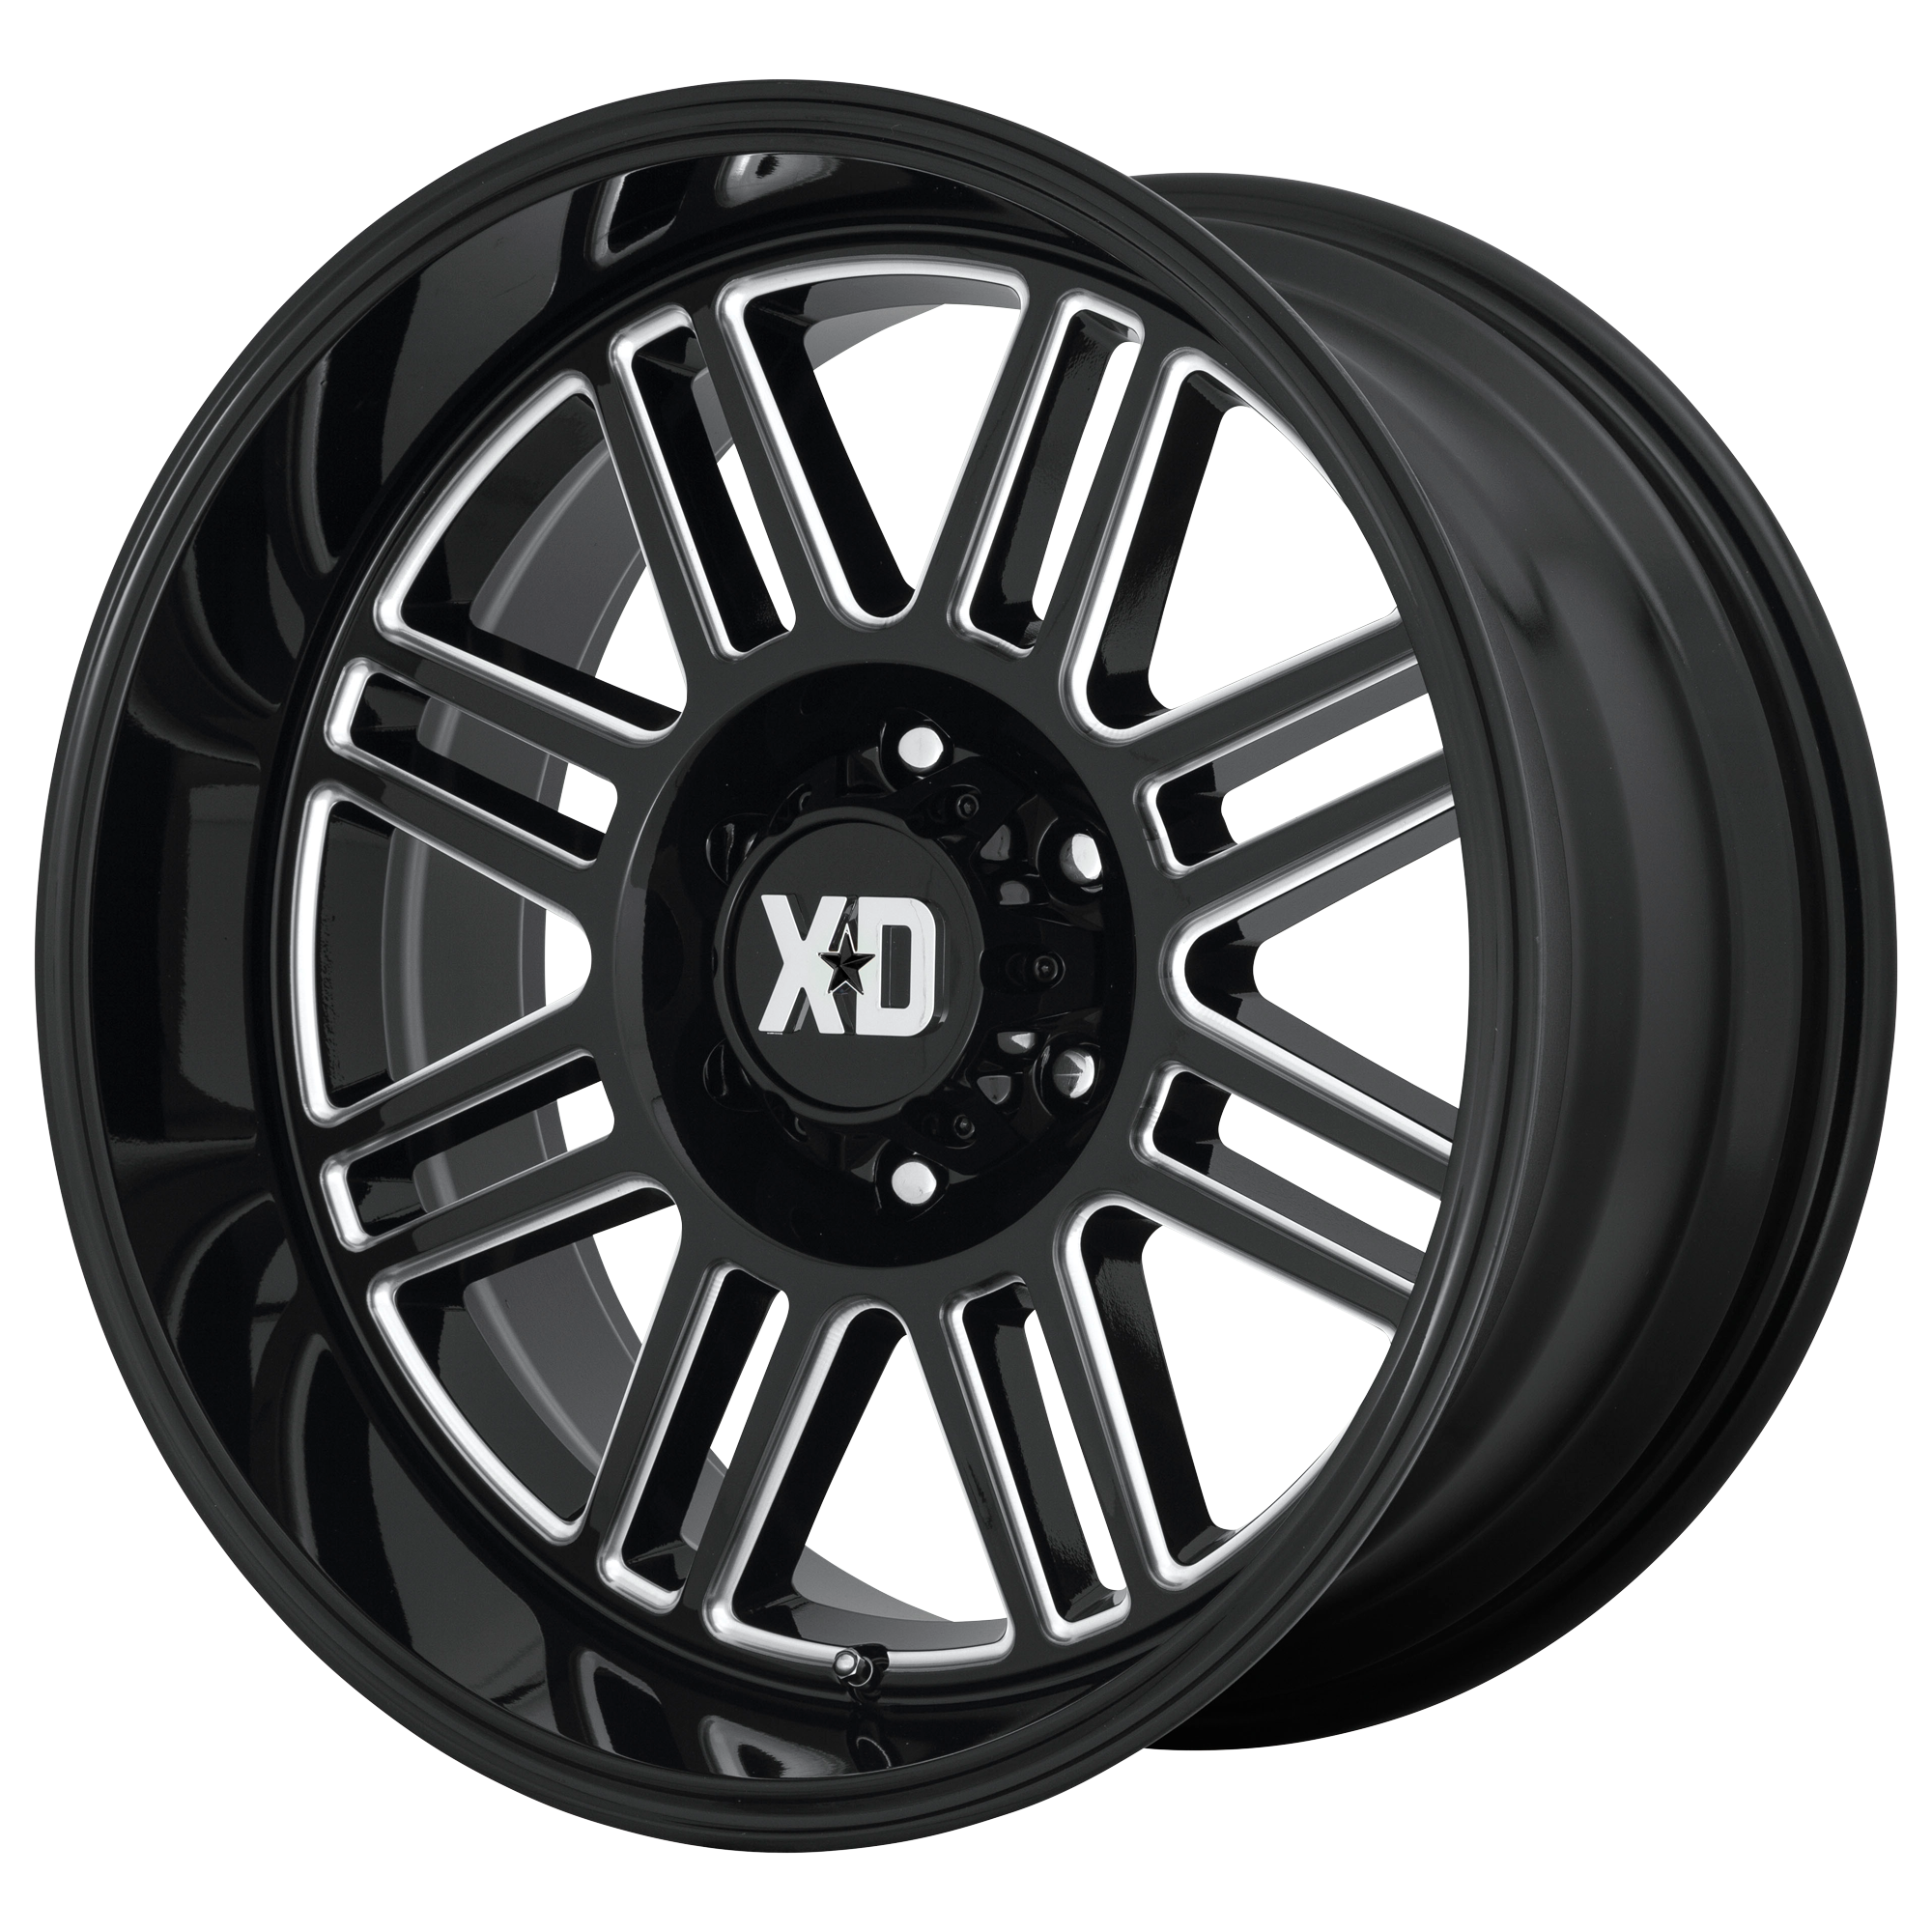 CAGE 20x9 8x170.00 GLOSS BLACK MILLED (18 mm) - Tires and Engine Performance